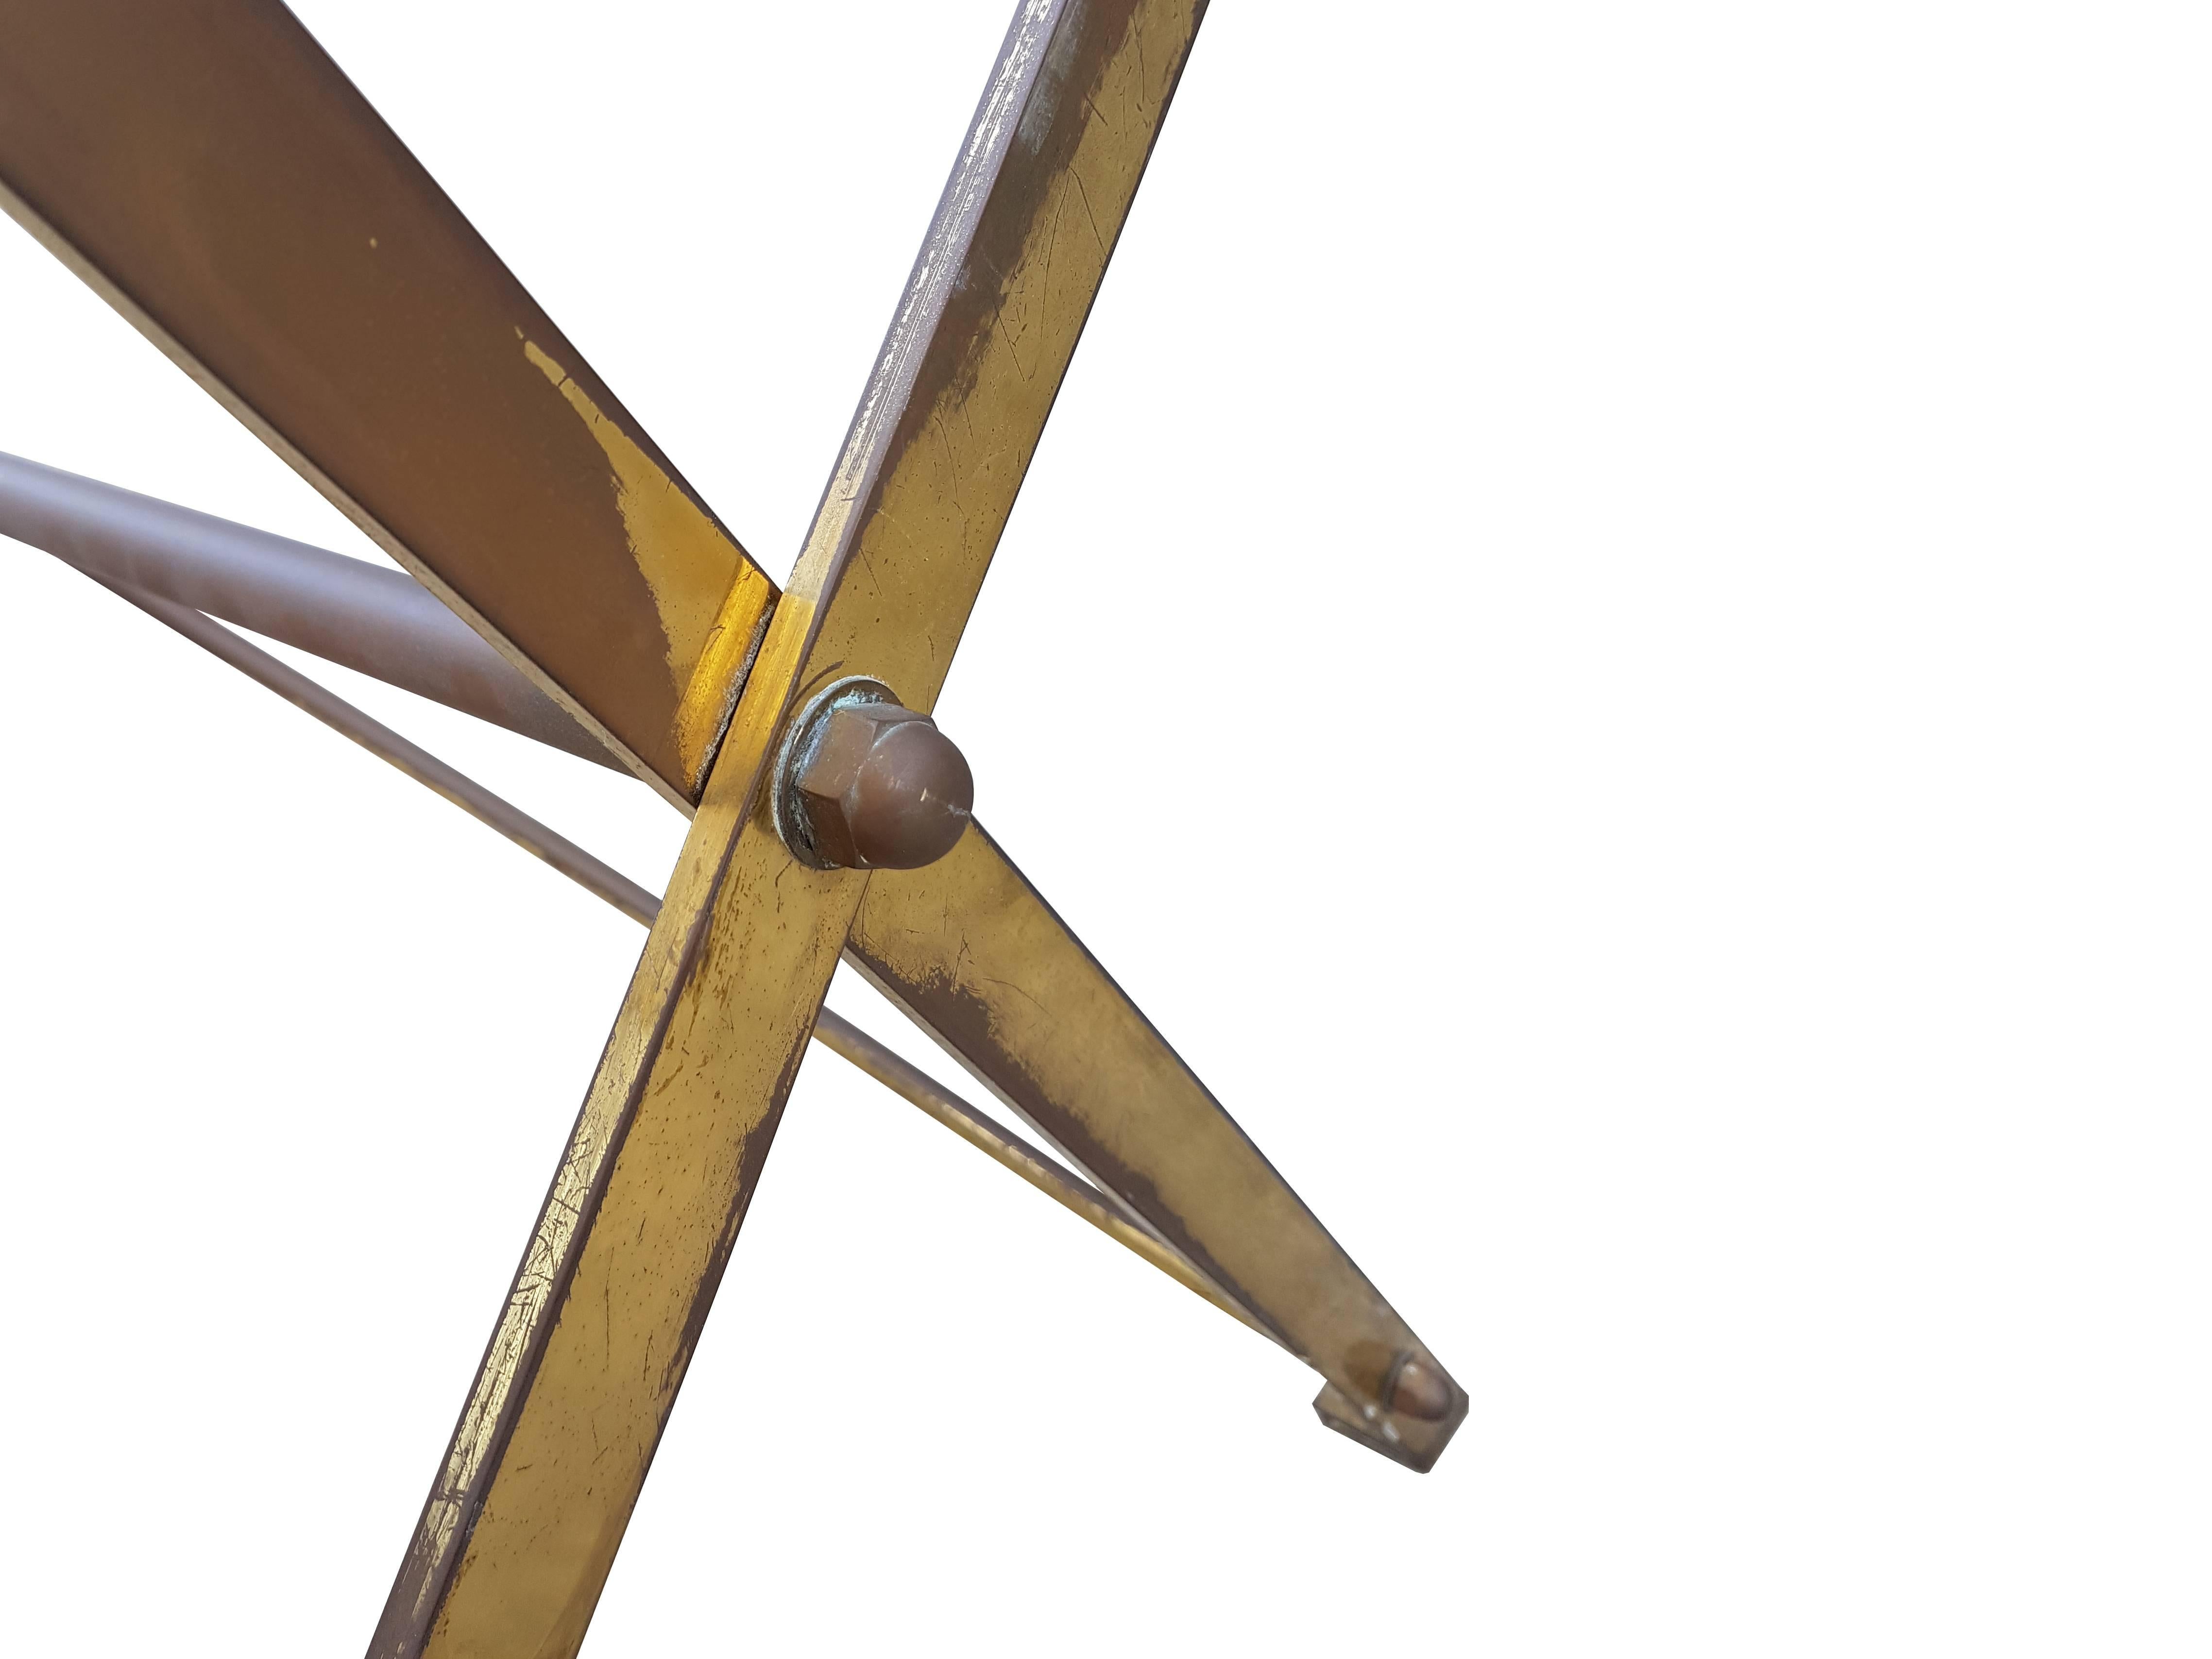 Vintage Wood and Brass T3 Cavalletto Table by Caccia Dominioni for Azucena 1950s For Sale 1